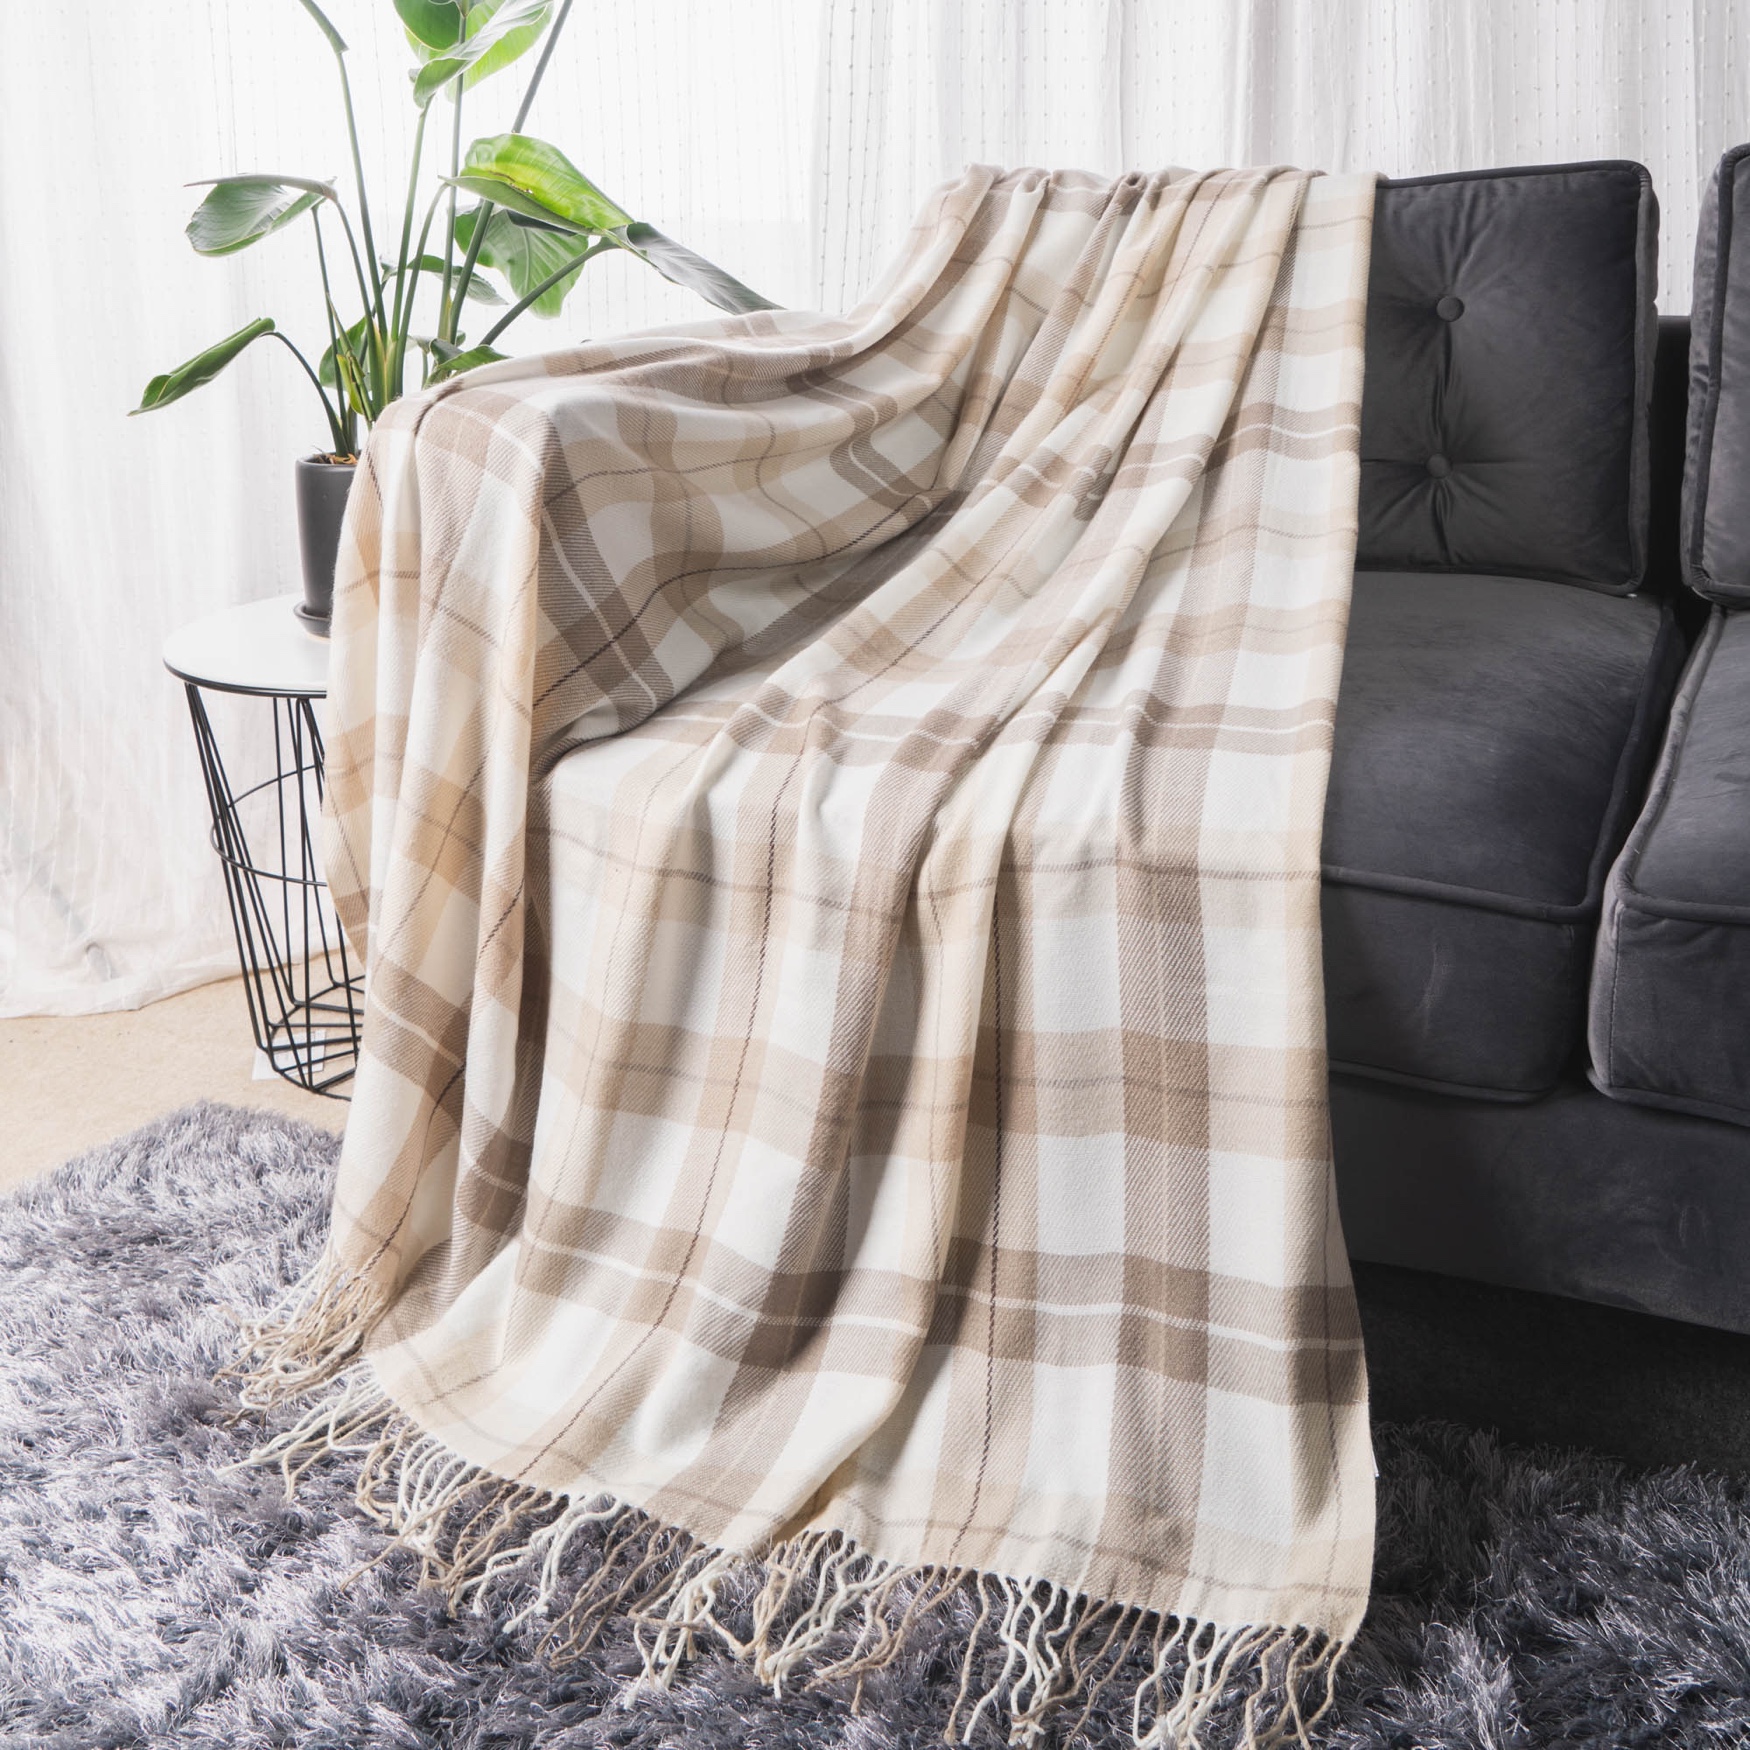 Battilo Home Grey and White Plaid Fringed Cashmere Shawl /Throw/ Blanket, 49&quot; x 63&quot;, GREY WHITE